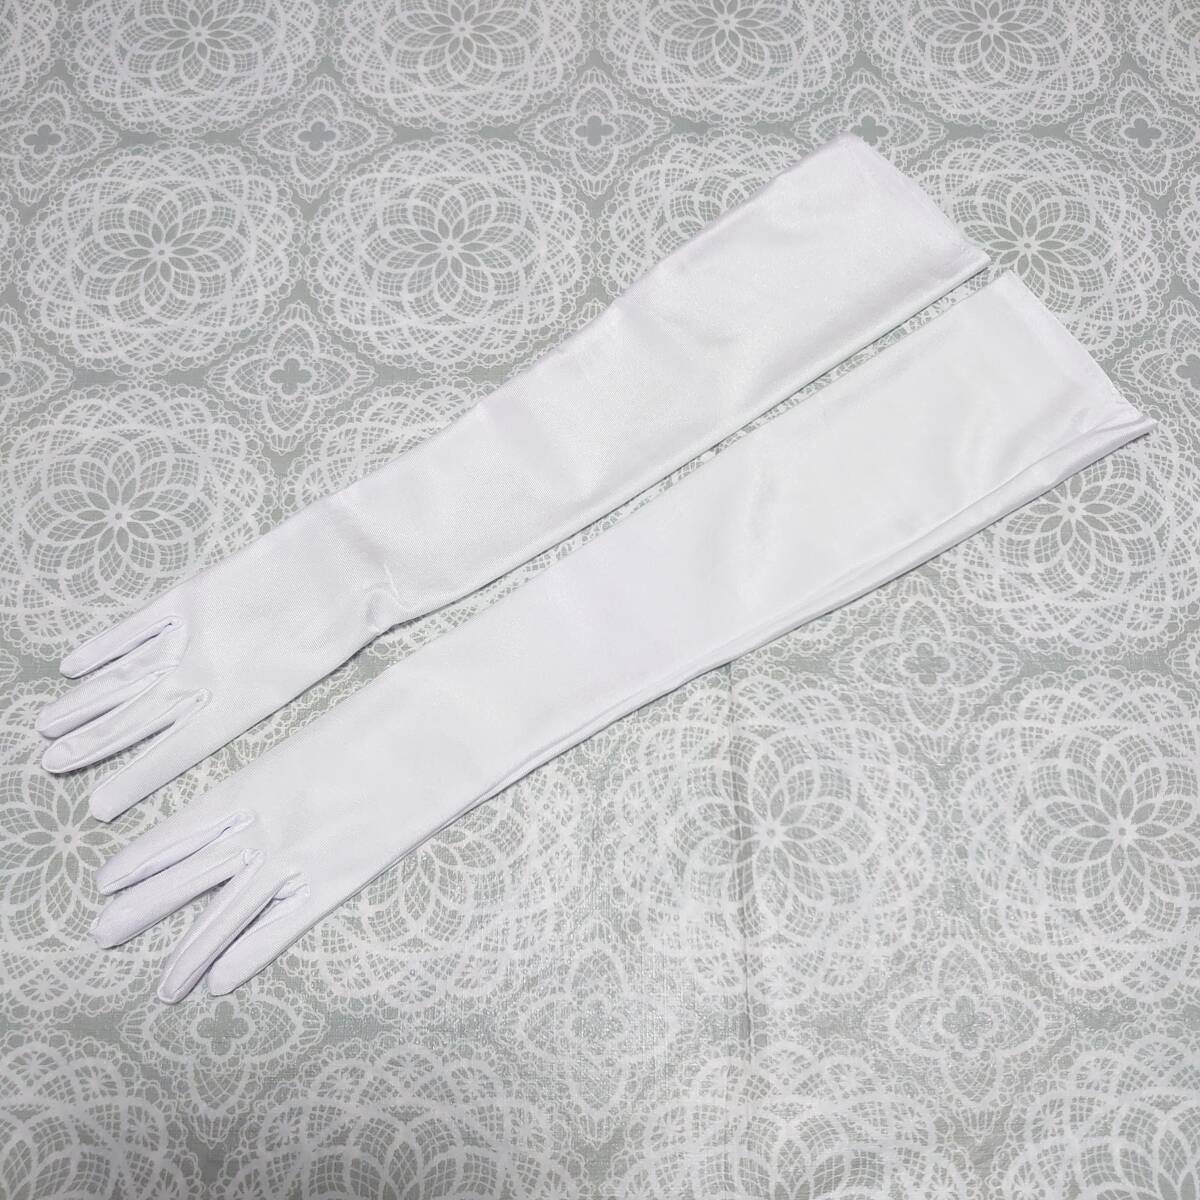  with translation * gloves * long glove * approximately 50cm* white * wedding * formal /1012